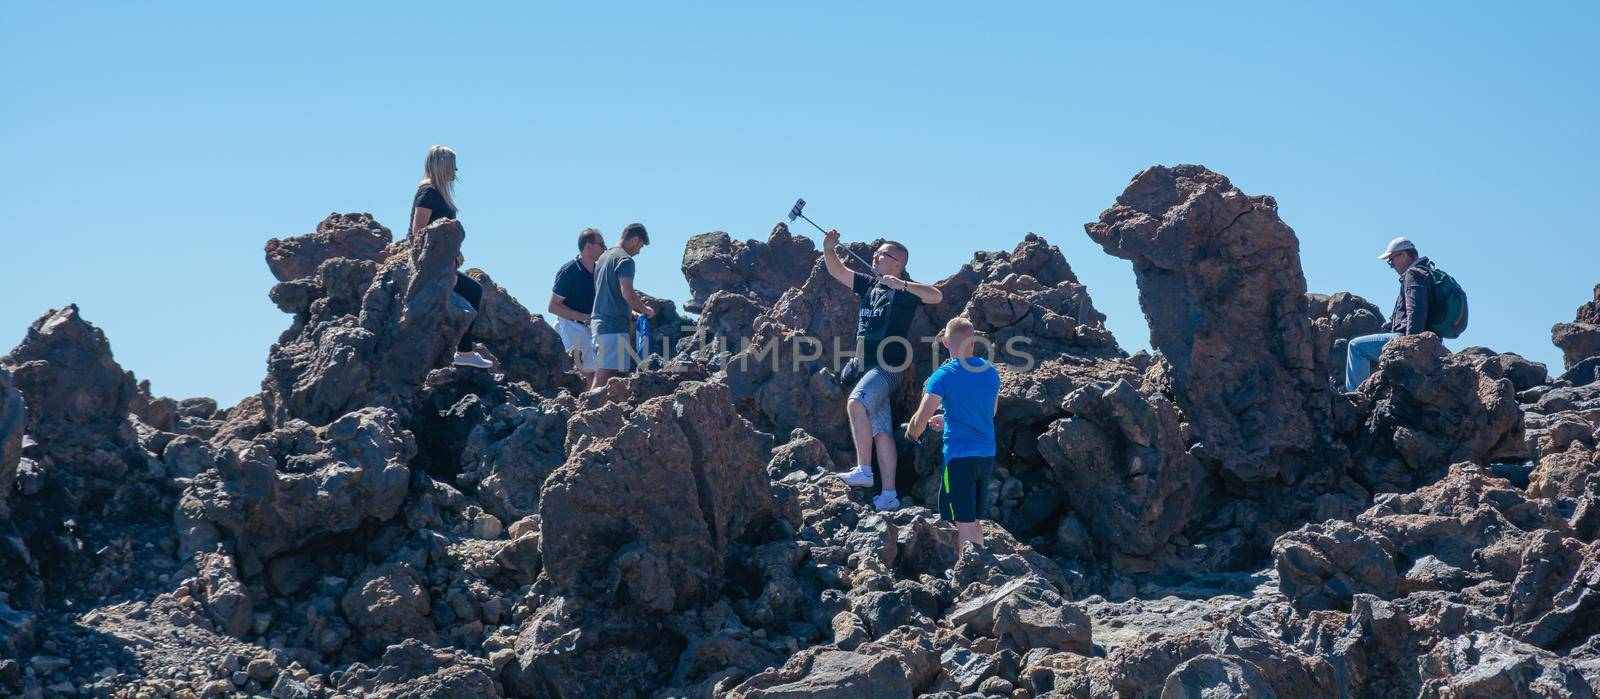 Spain, Tenerife - 09/15/2016: Photoshoot of tourists on the volcanic rocks of the Teide volcano. Stock photography